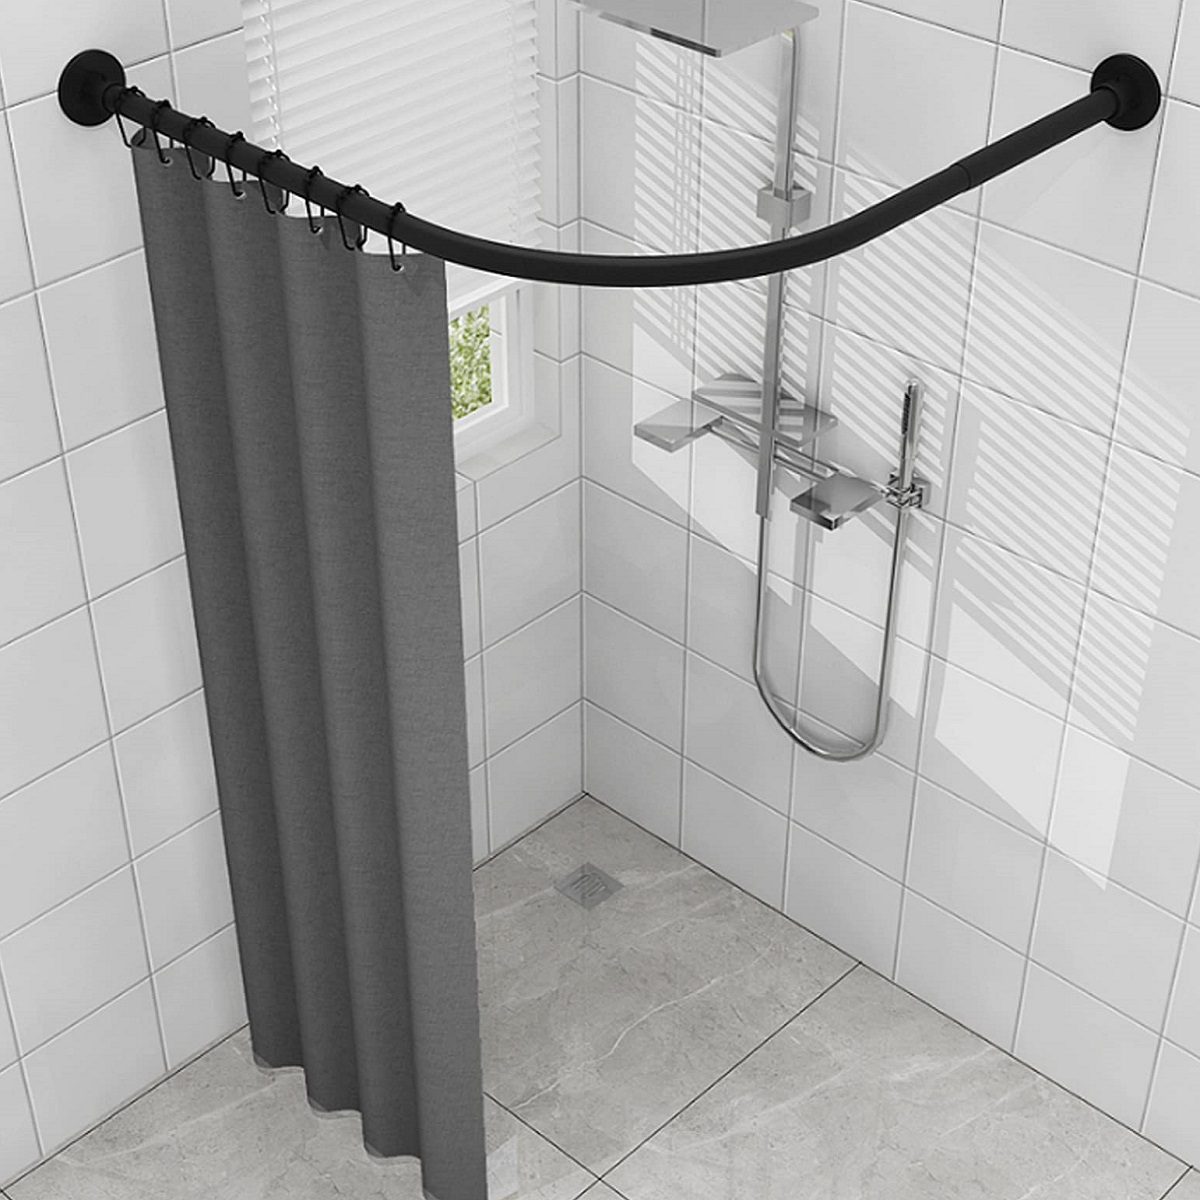 How To Install A Curved Tension Shower Rod